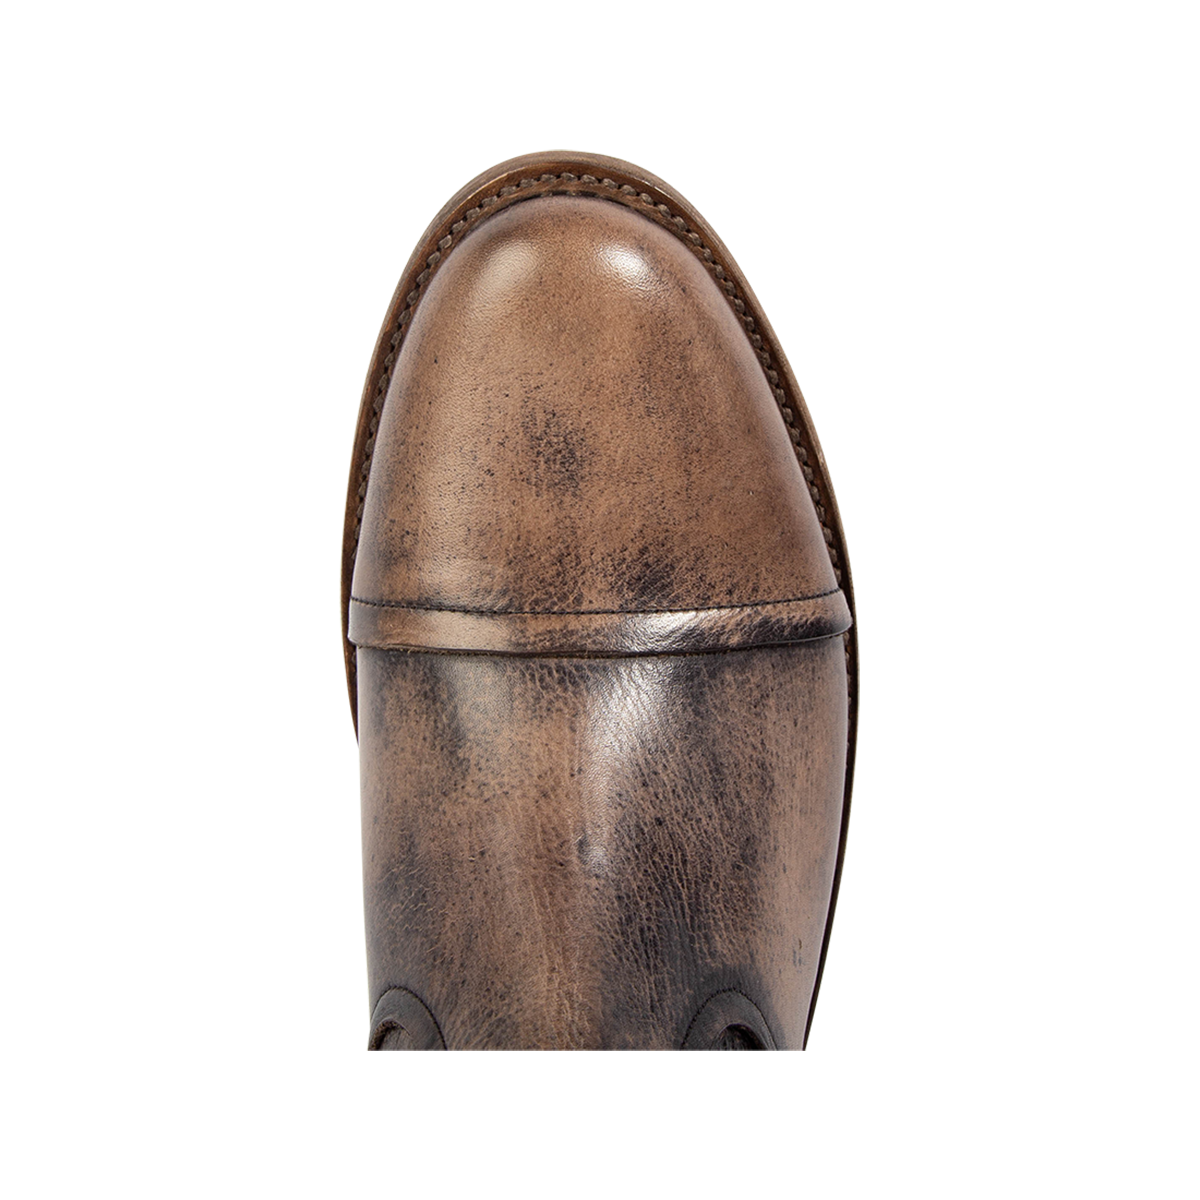 Top view showing an almond toe on FREEBIRD men's Brooks black leather boot